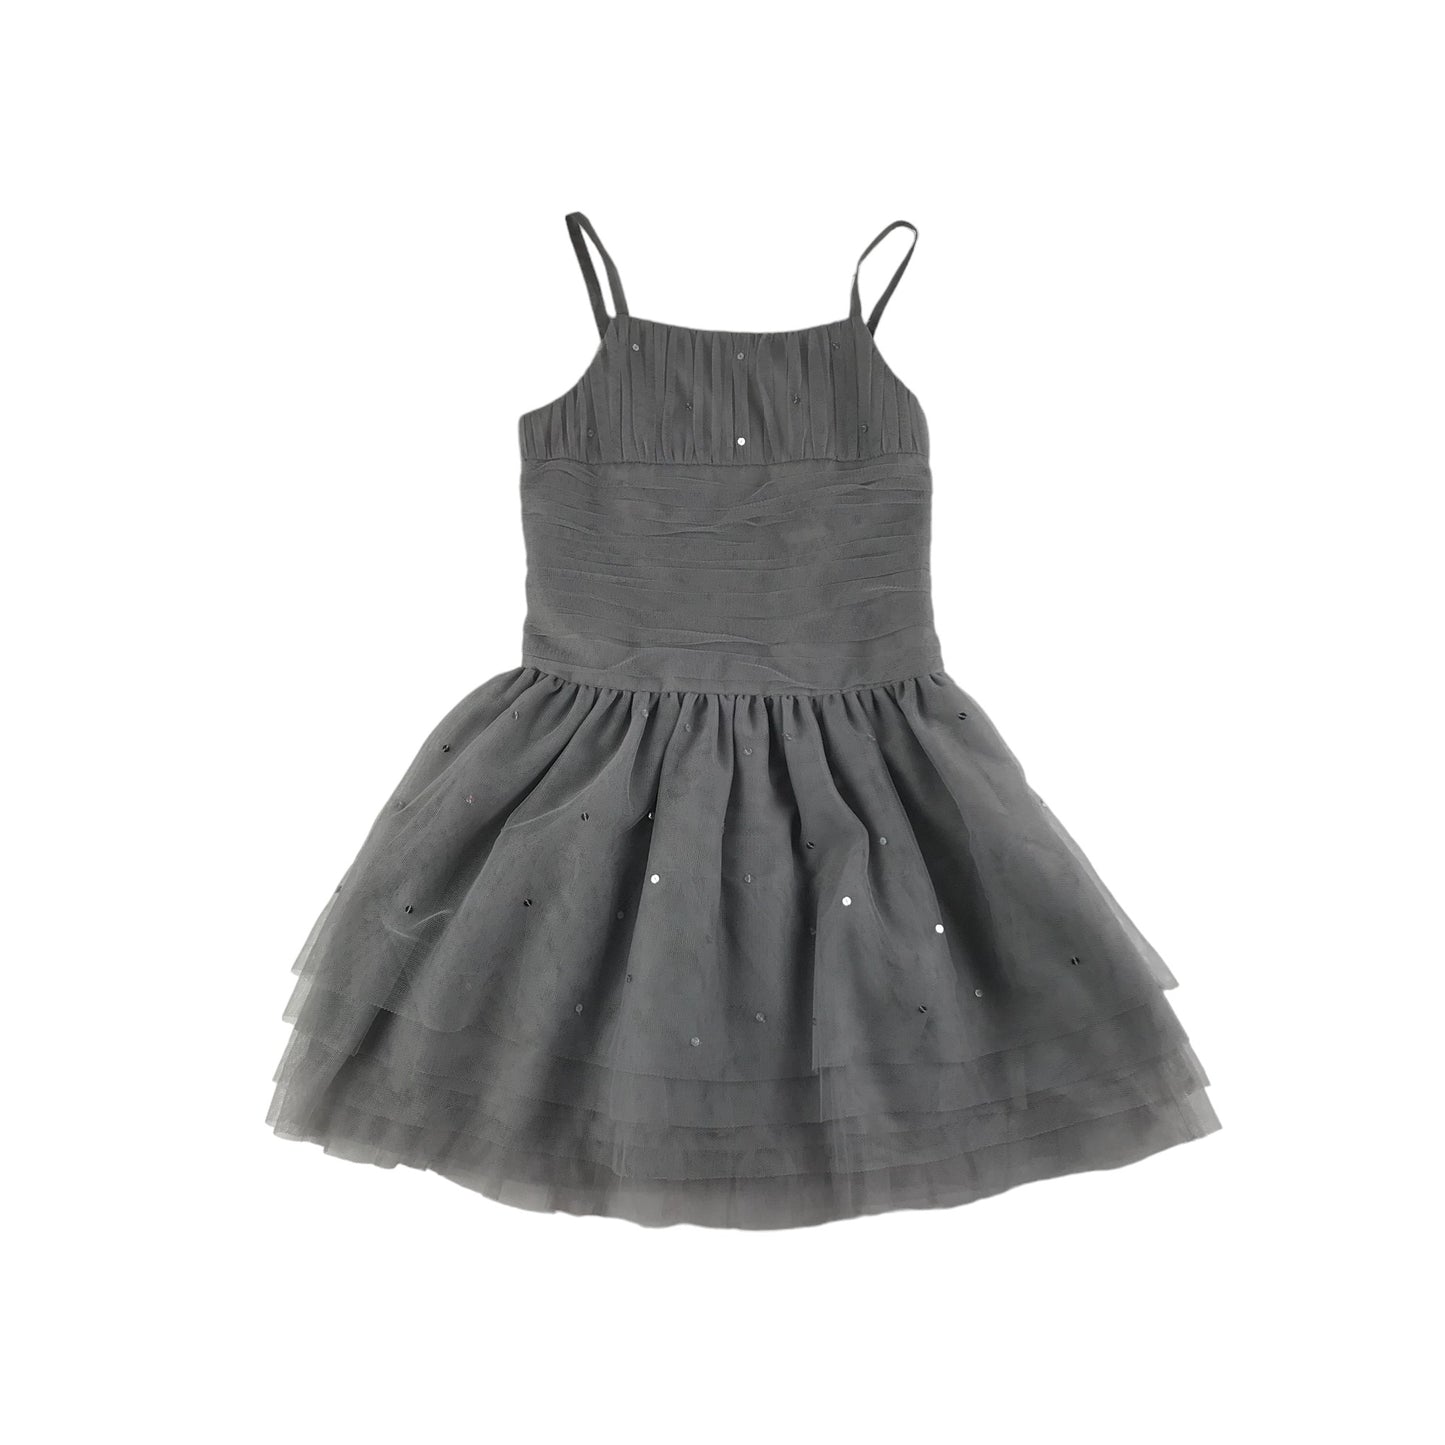 M&S Dress Age 9 Grey Mesh Layered Strap Shoulders Sequins